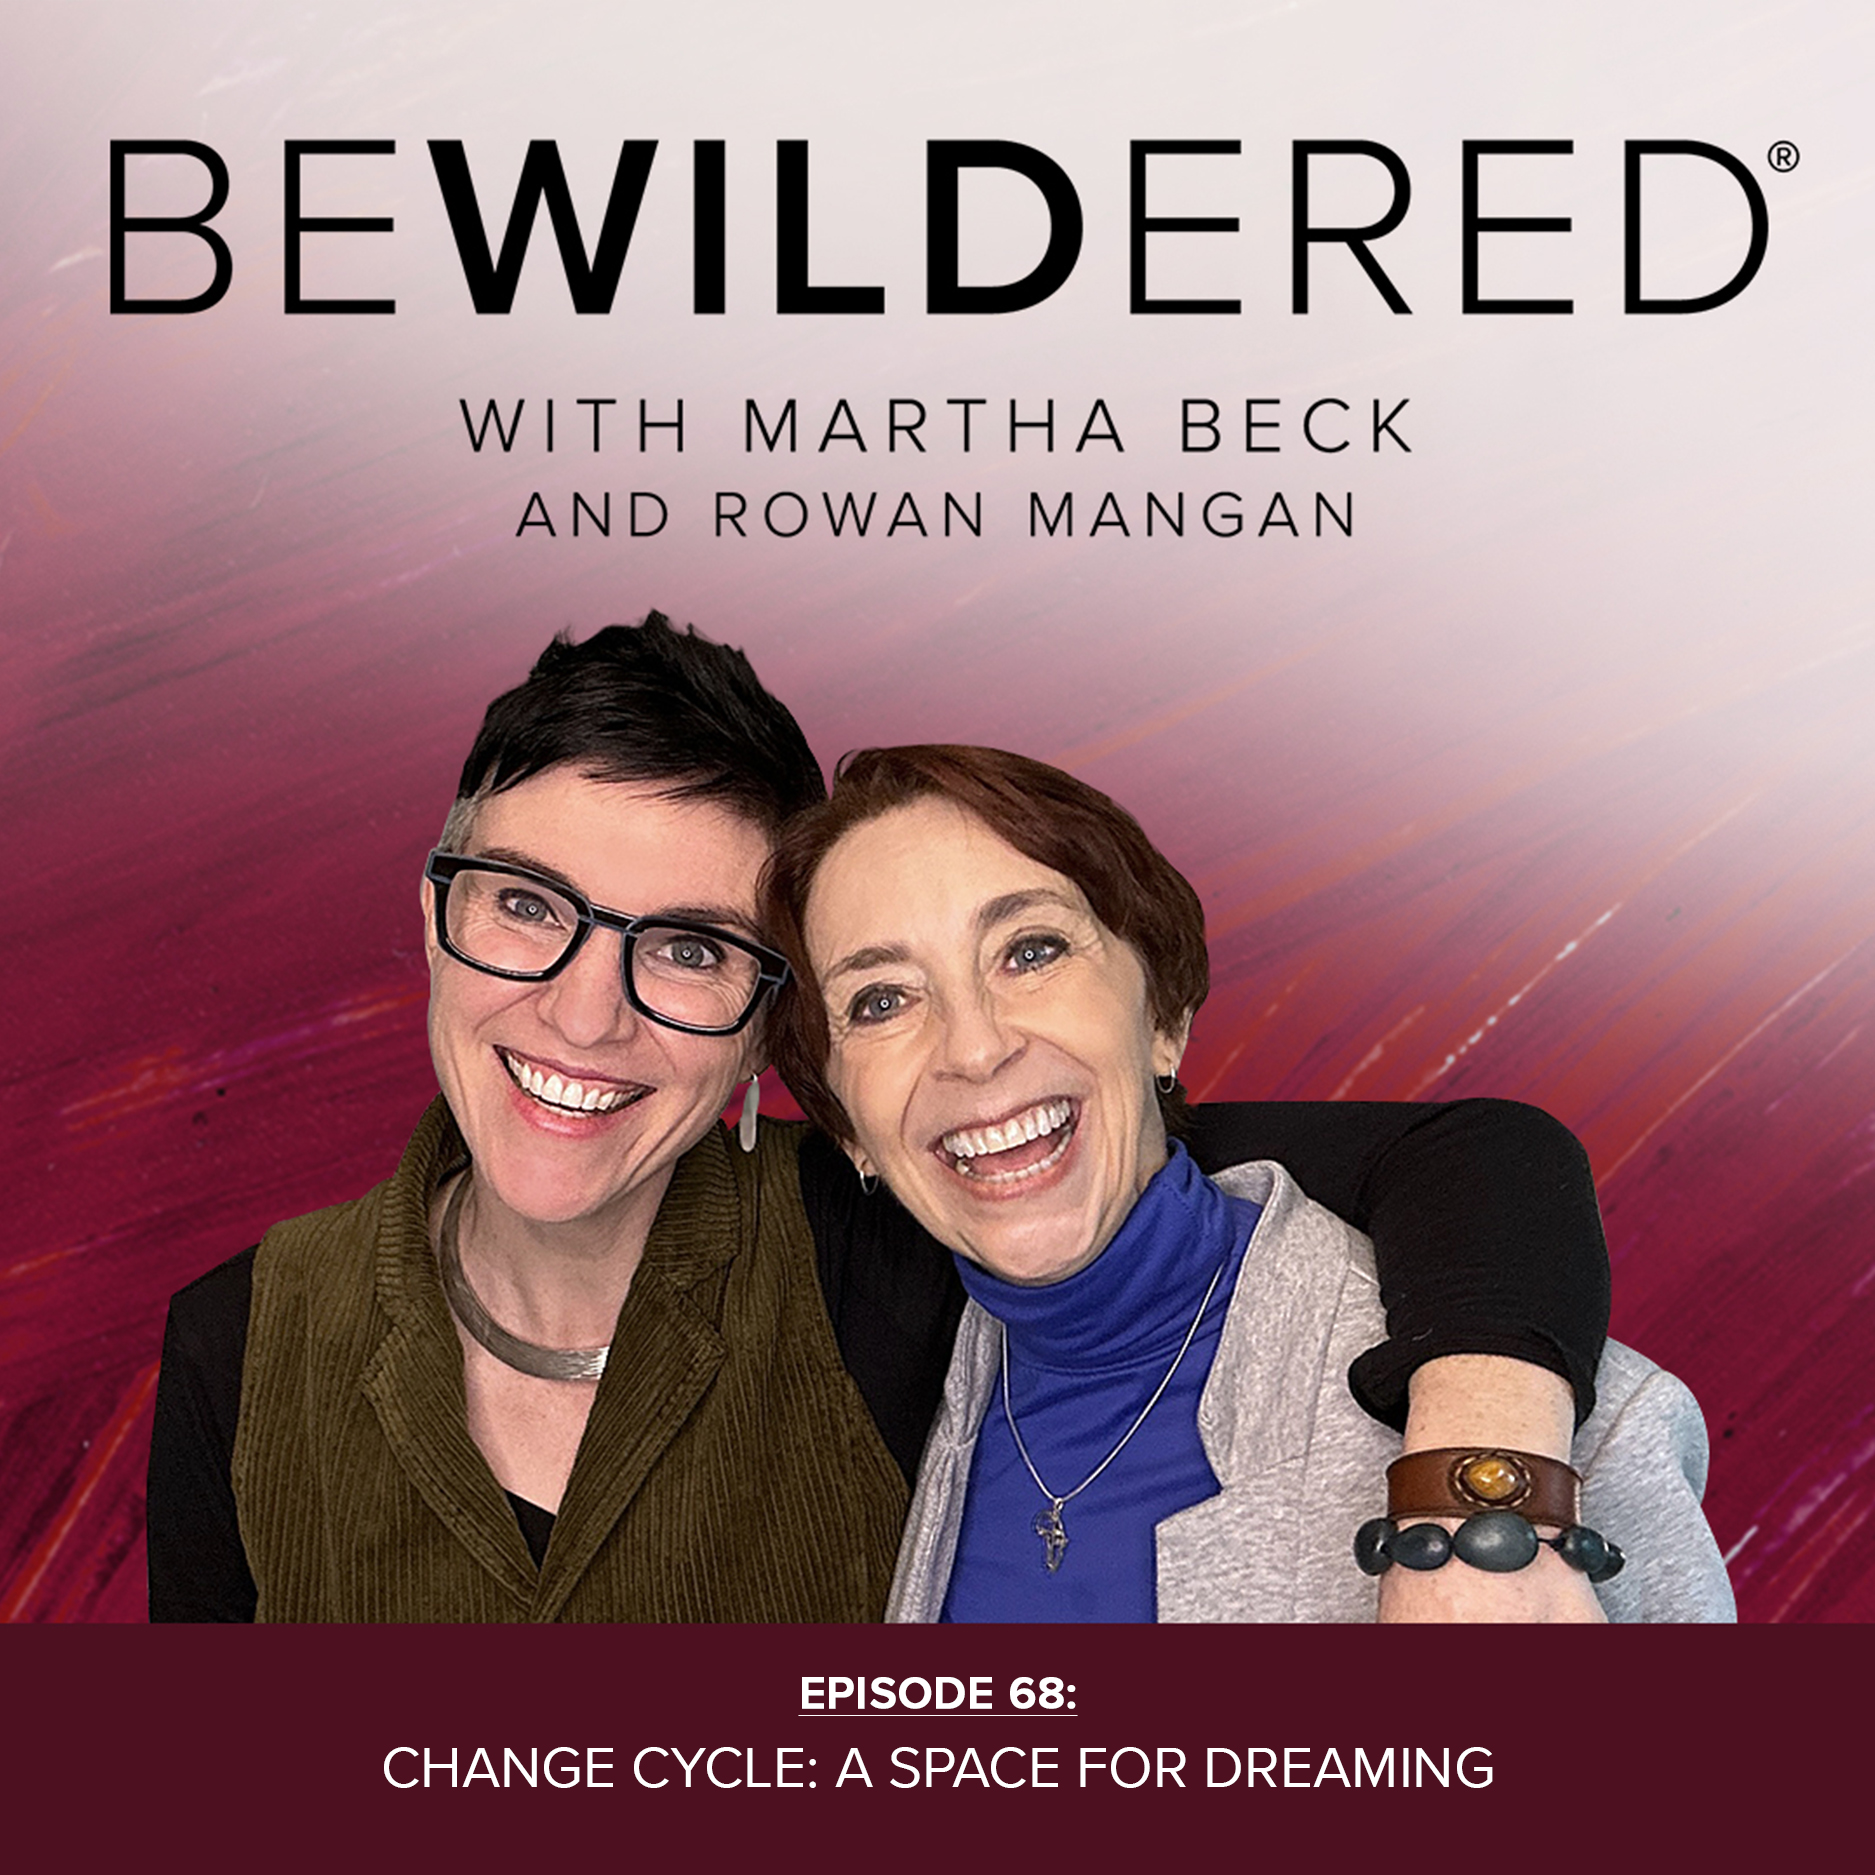 Image for Episode #68 Change Cycle: A Space for Dreaming for the Bewildered Podcast with Martha Beck and Rowan Mangan